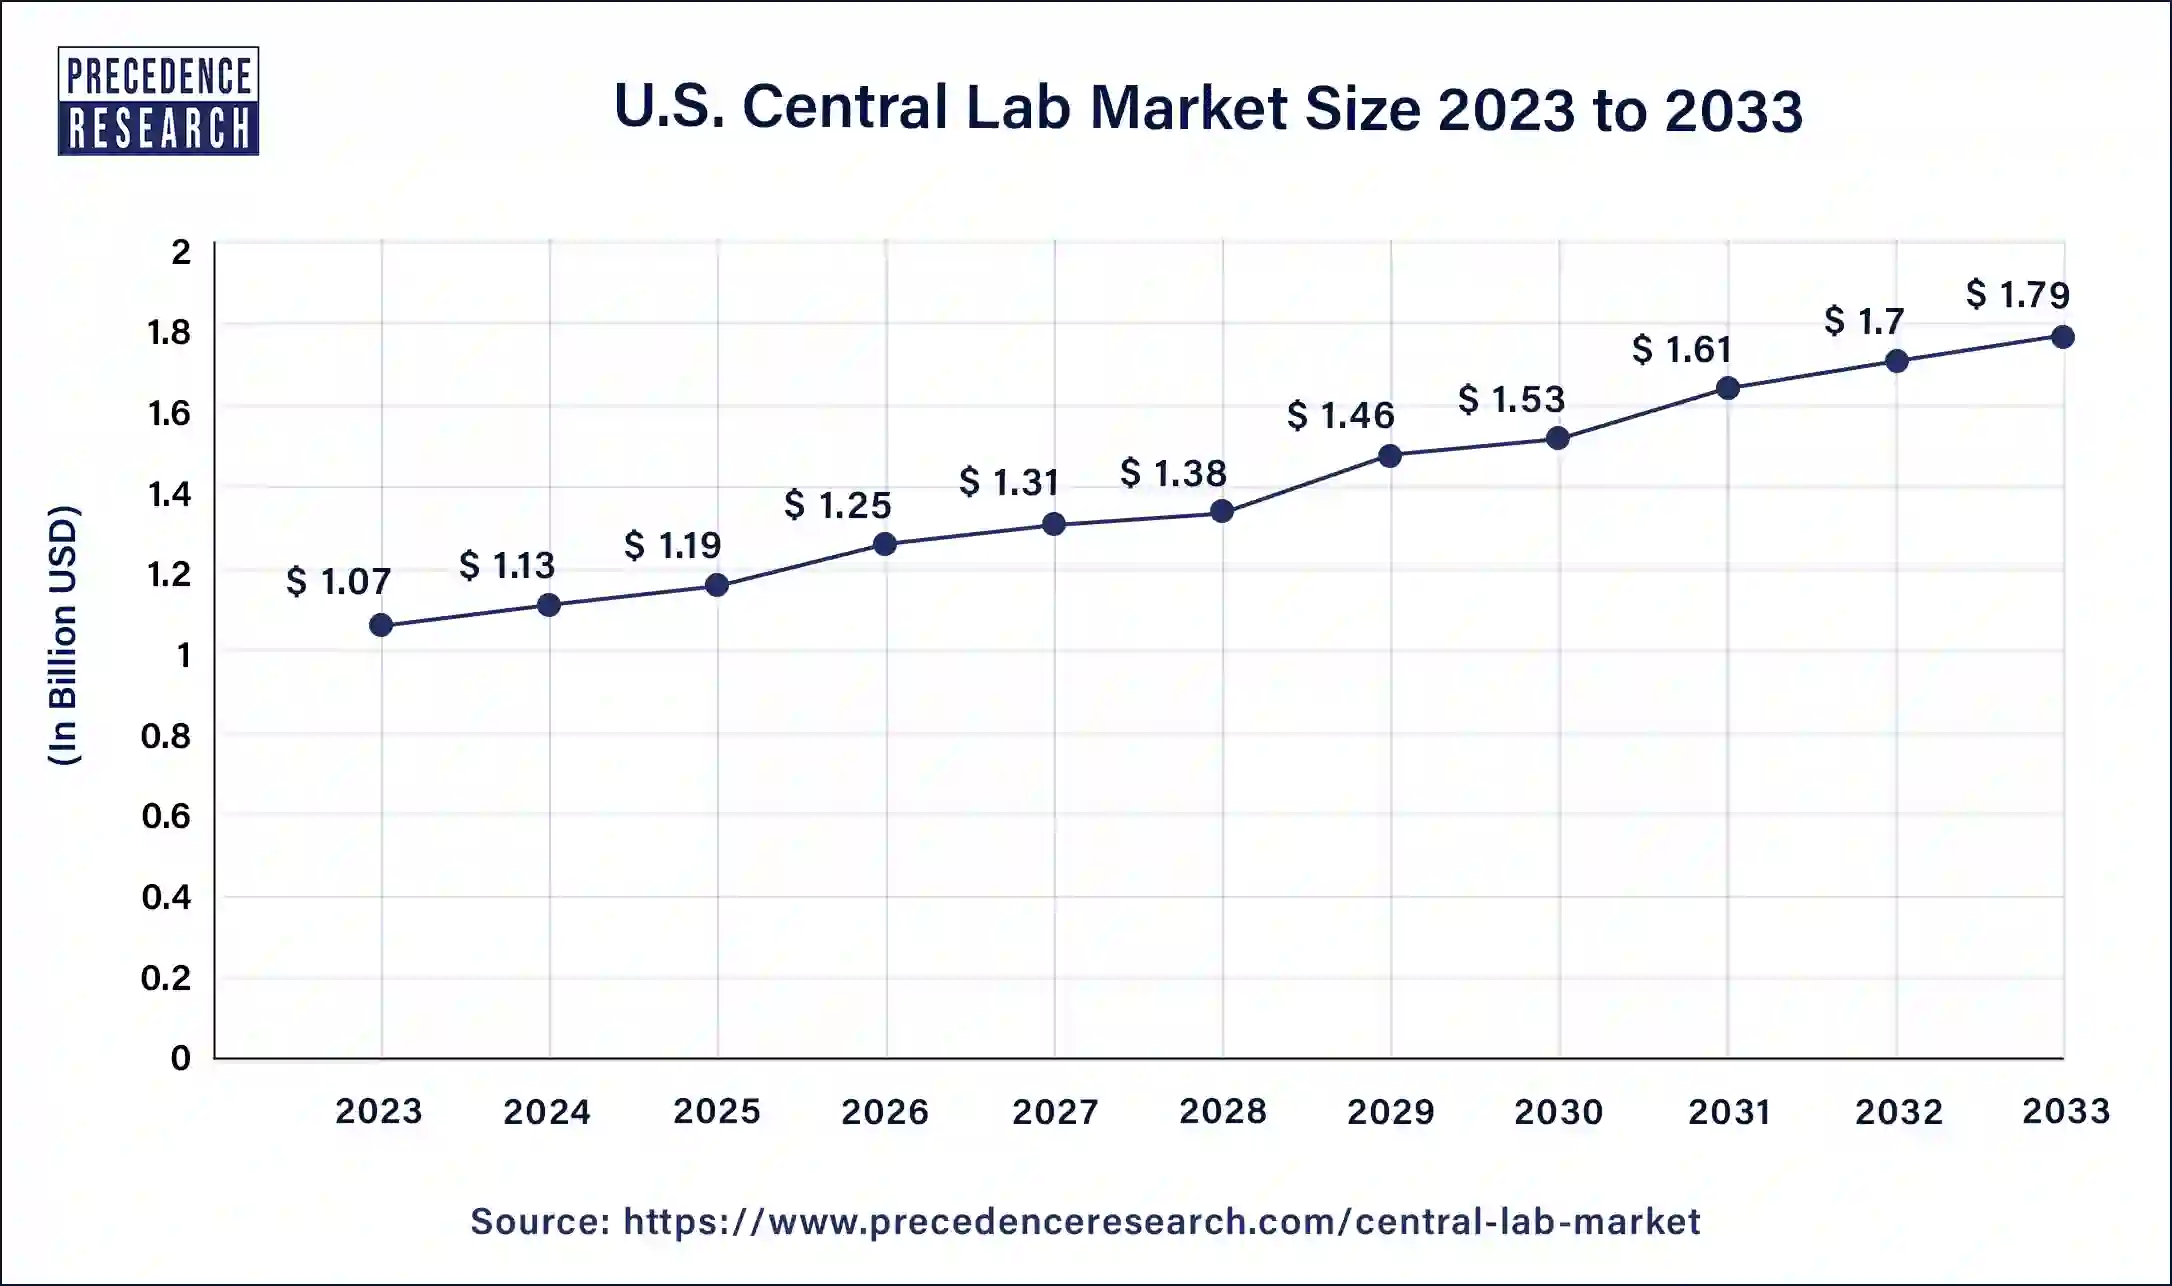 U.S. Central Lab Market Size 2024 to 2033